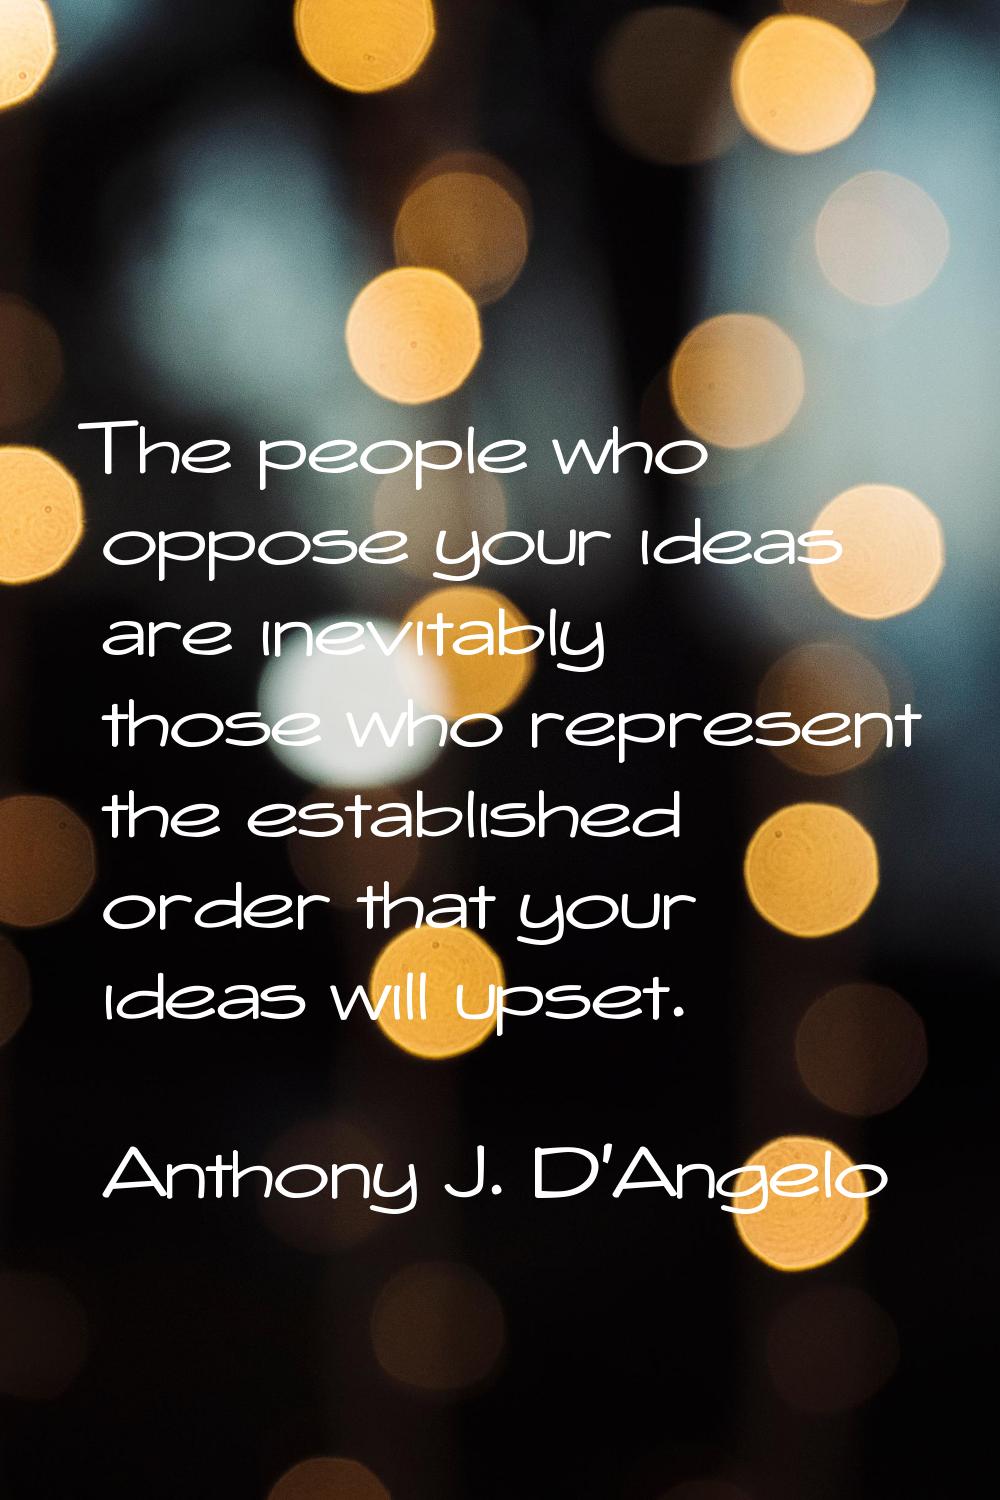 The people who oppose your ideas are inevitably those who represent the established order that your